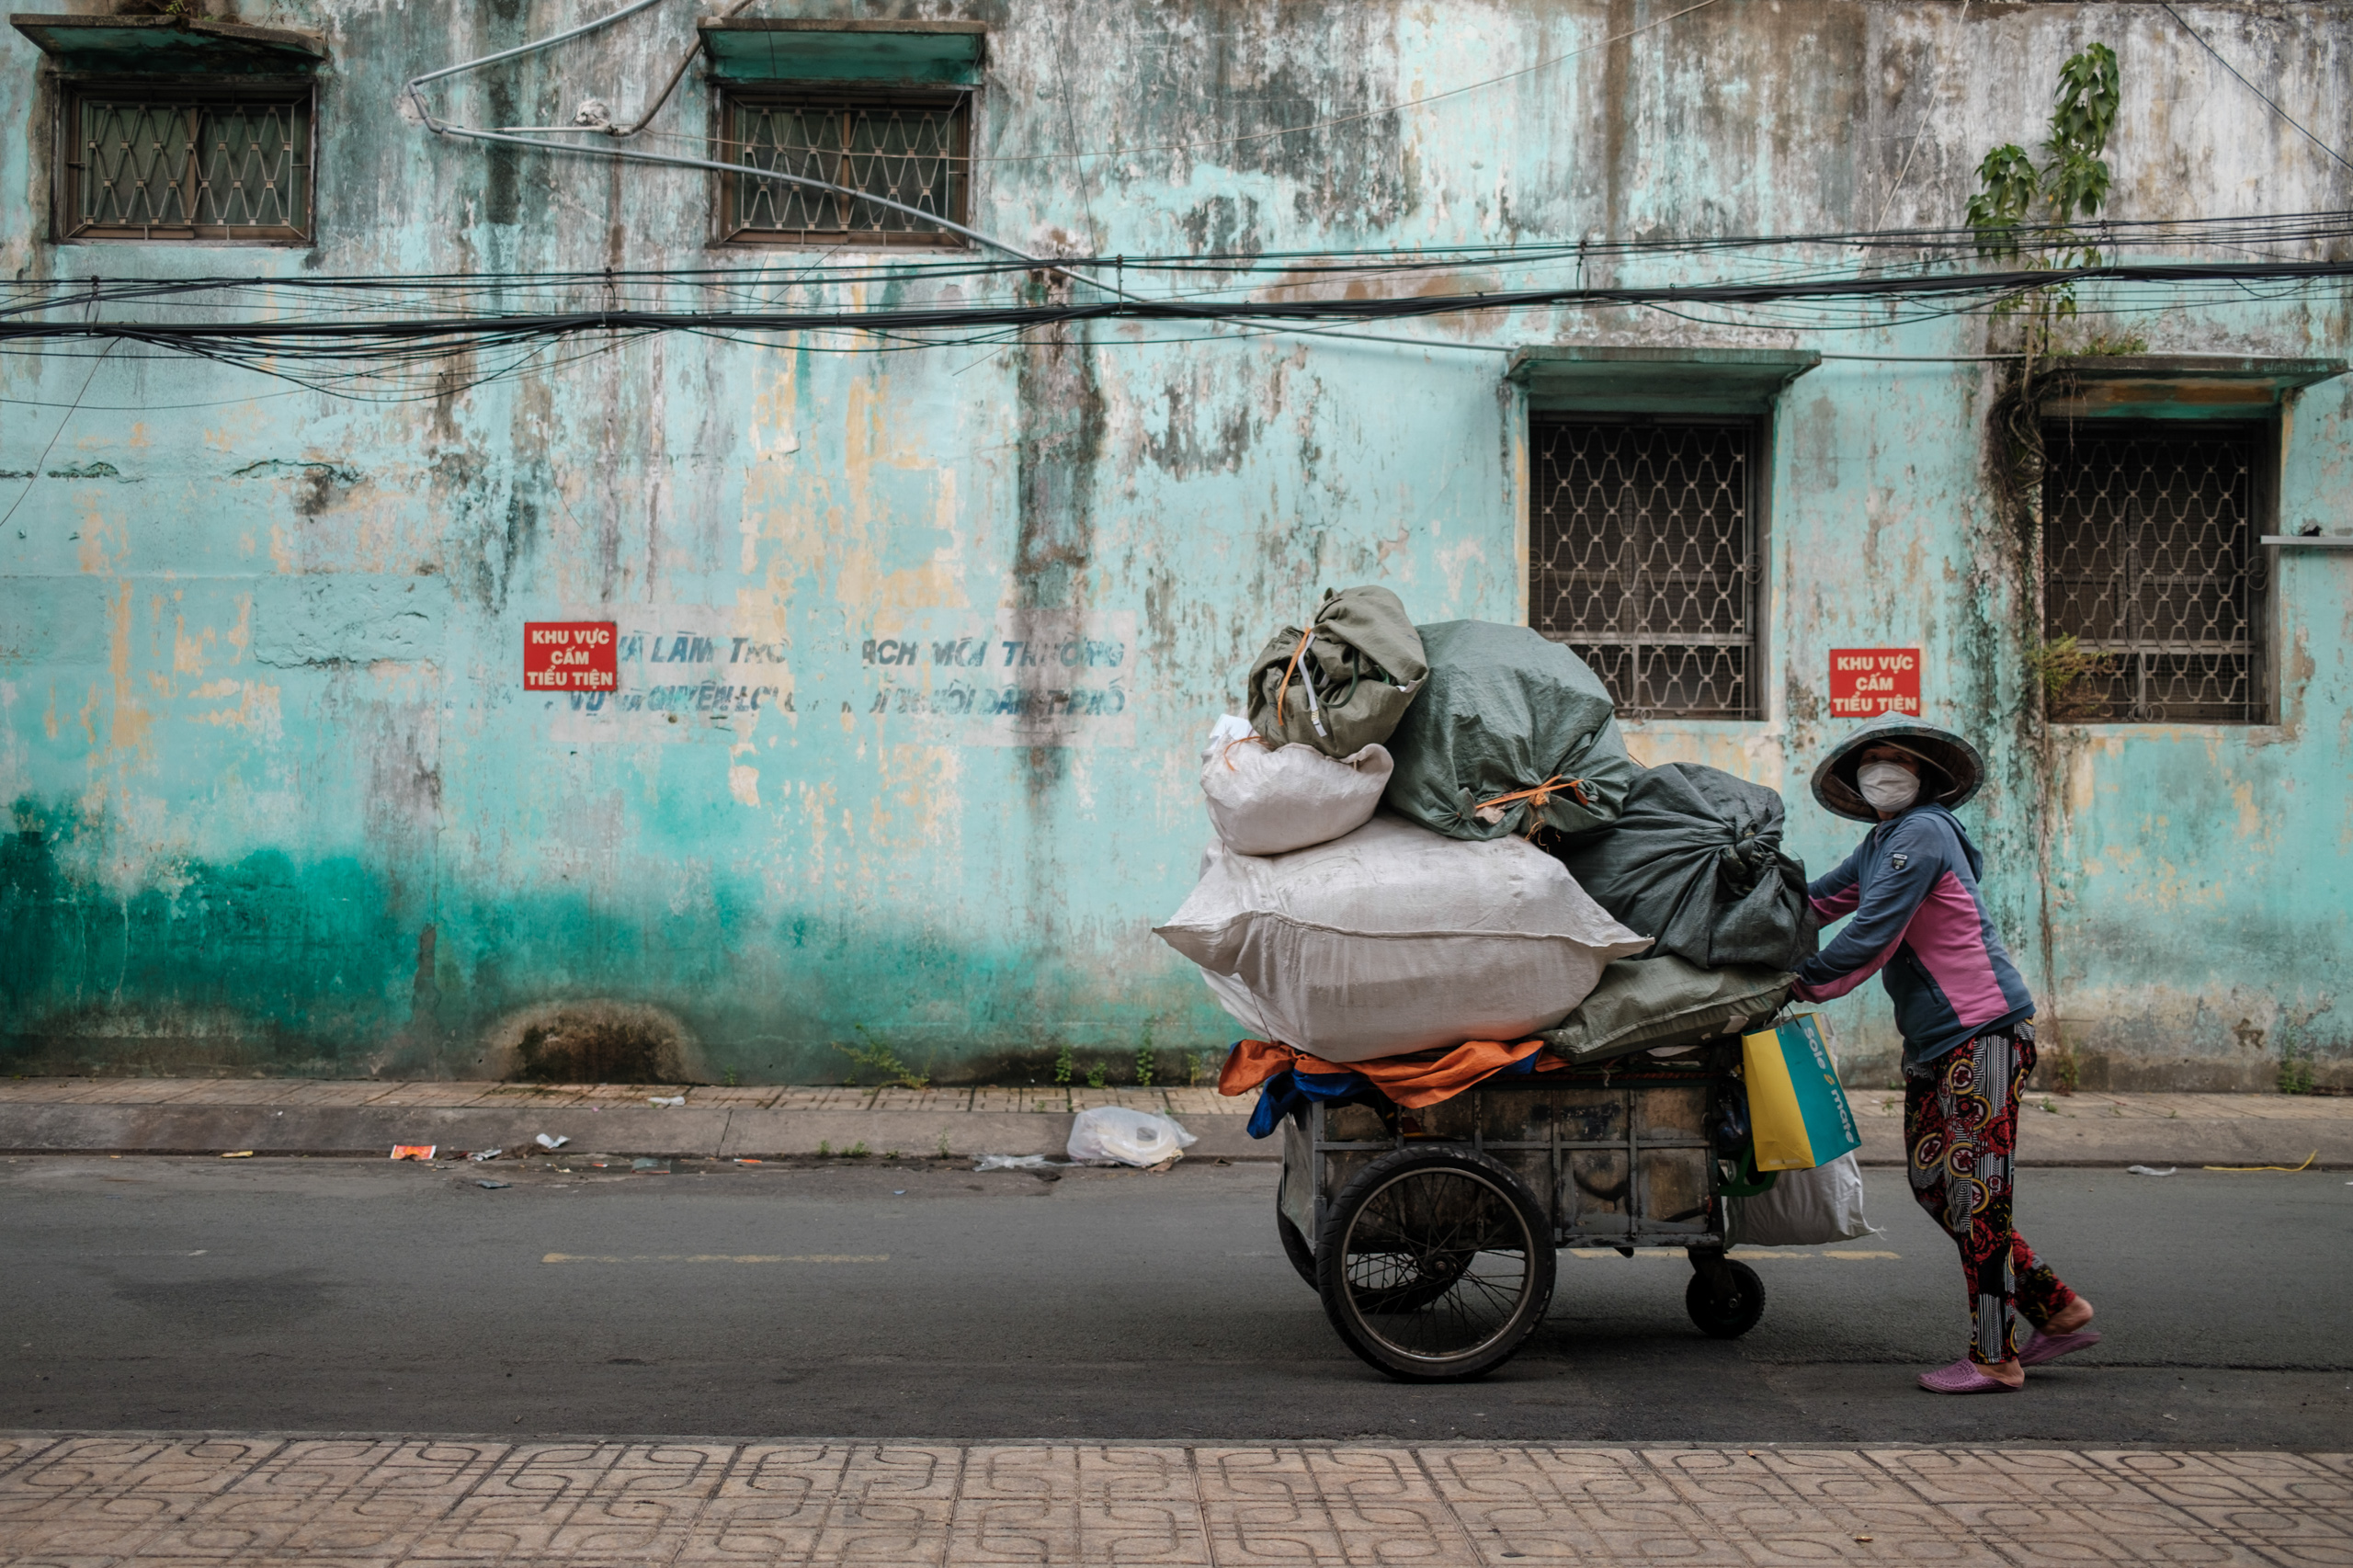 An informal waste picker transports recyclable materials to a processing center in Ho Chi Minh City